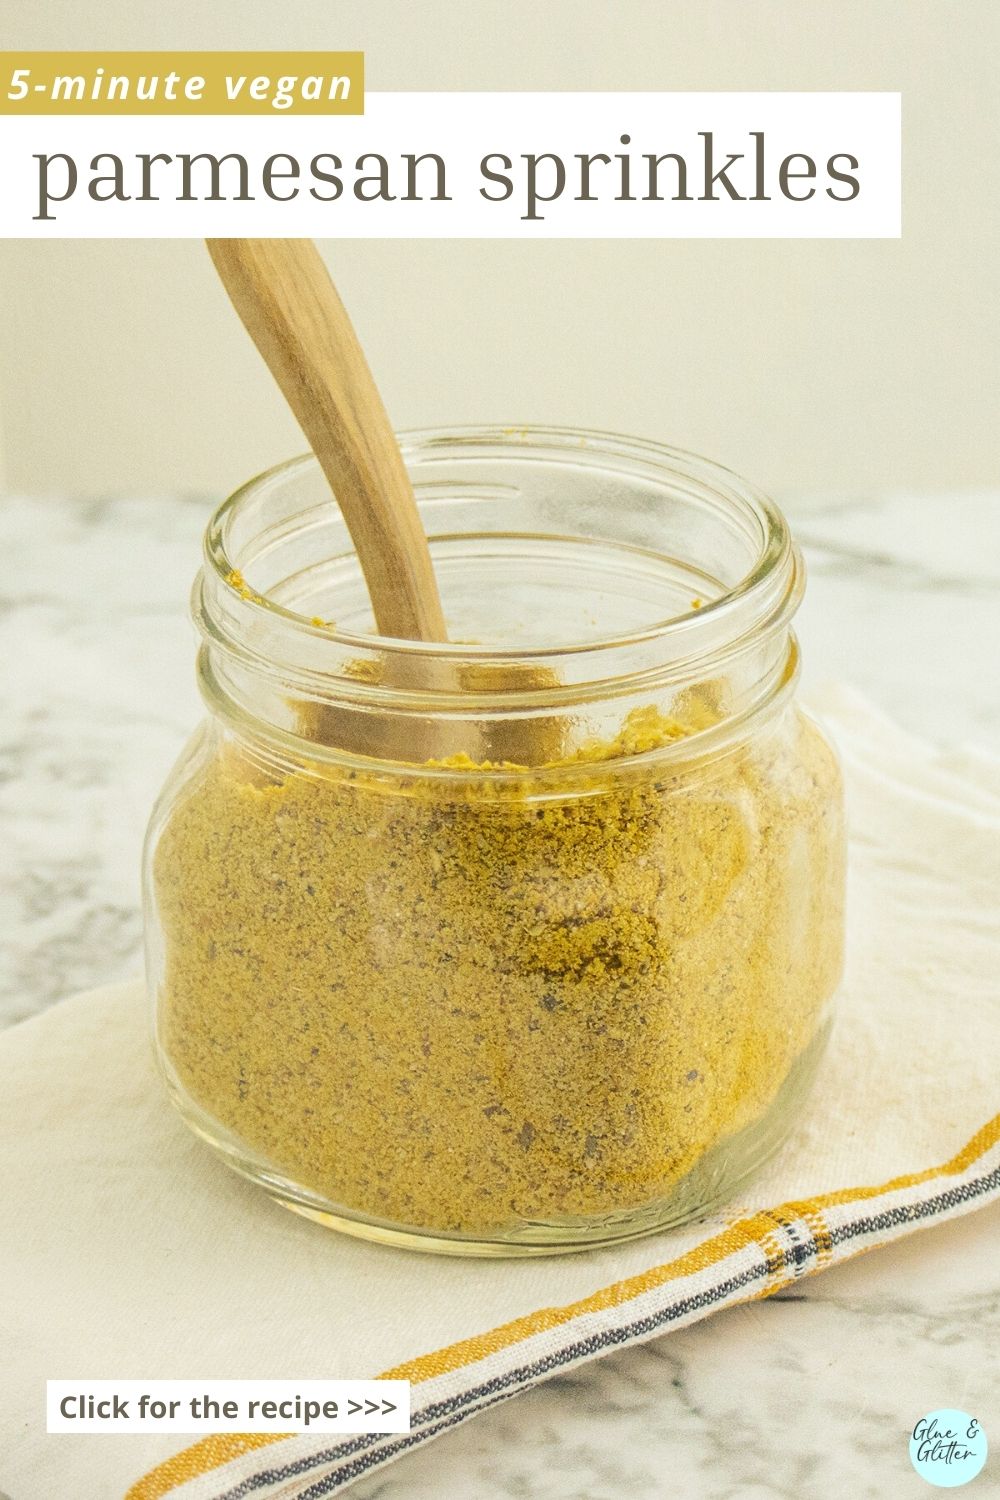 glass jar of vegan parmesan cheese with a wooden scoop in it, text overlay